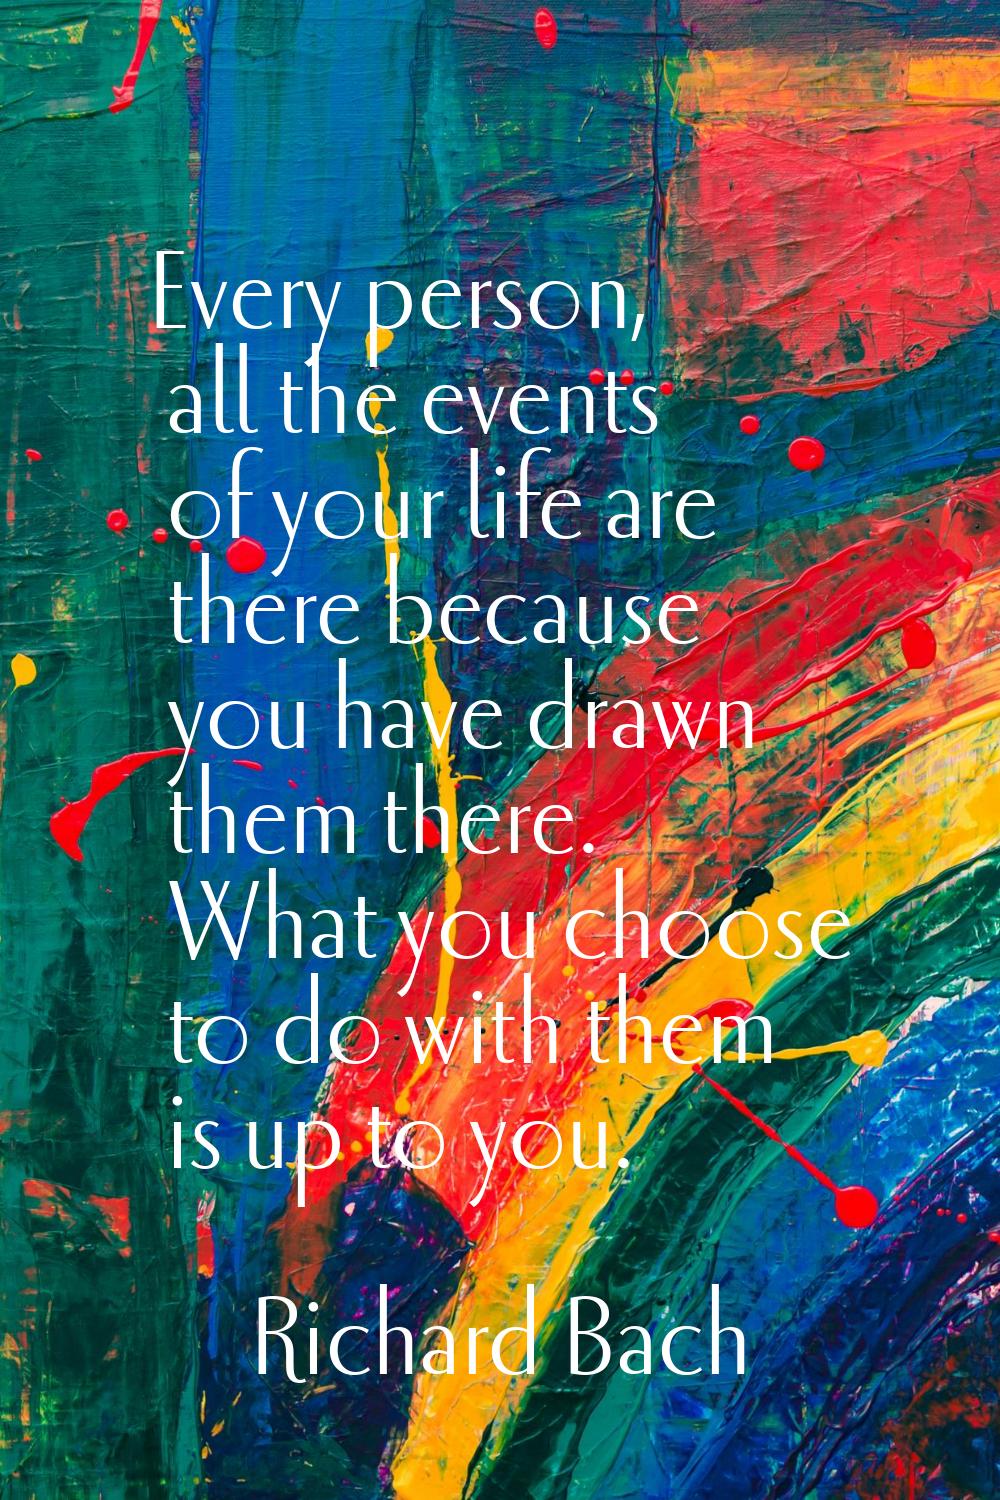 Every person, all the events of your life are there because you have drawn them there. What you cho